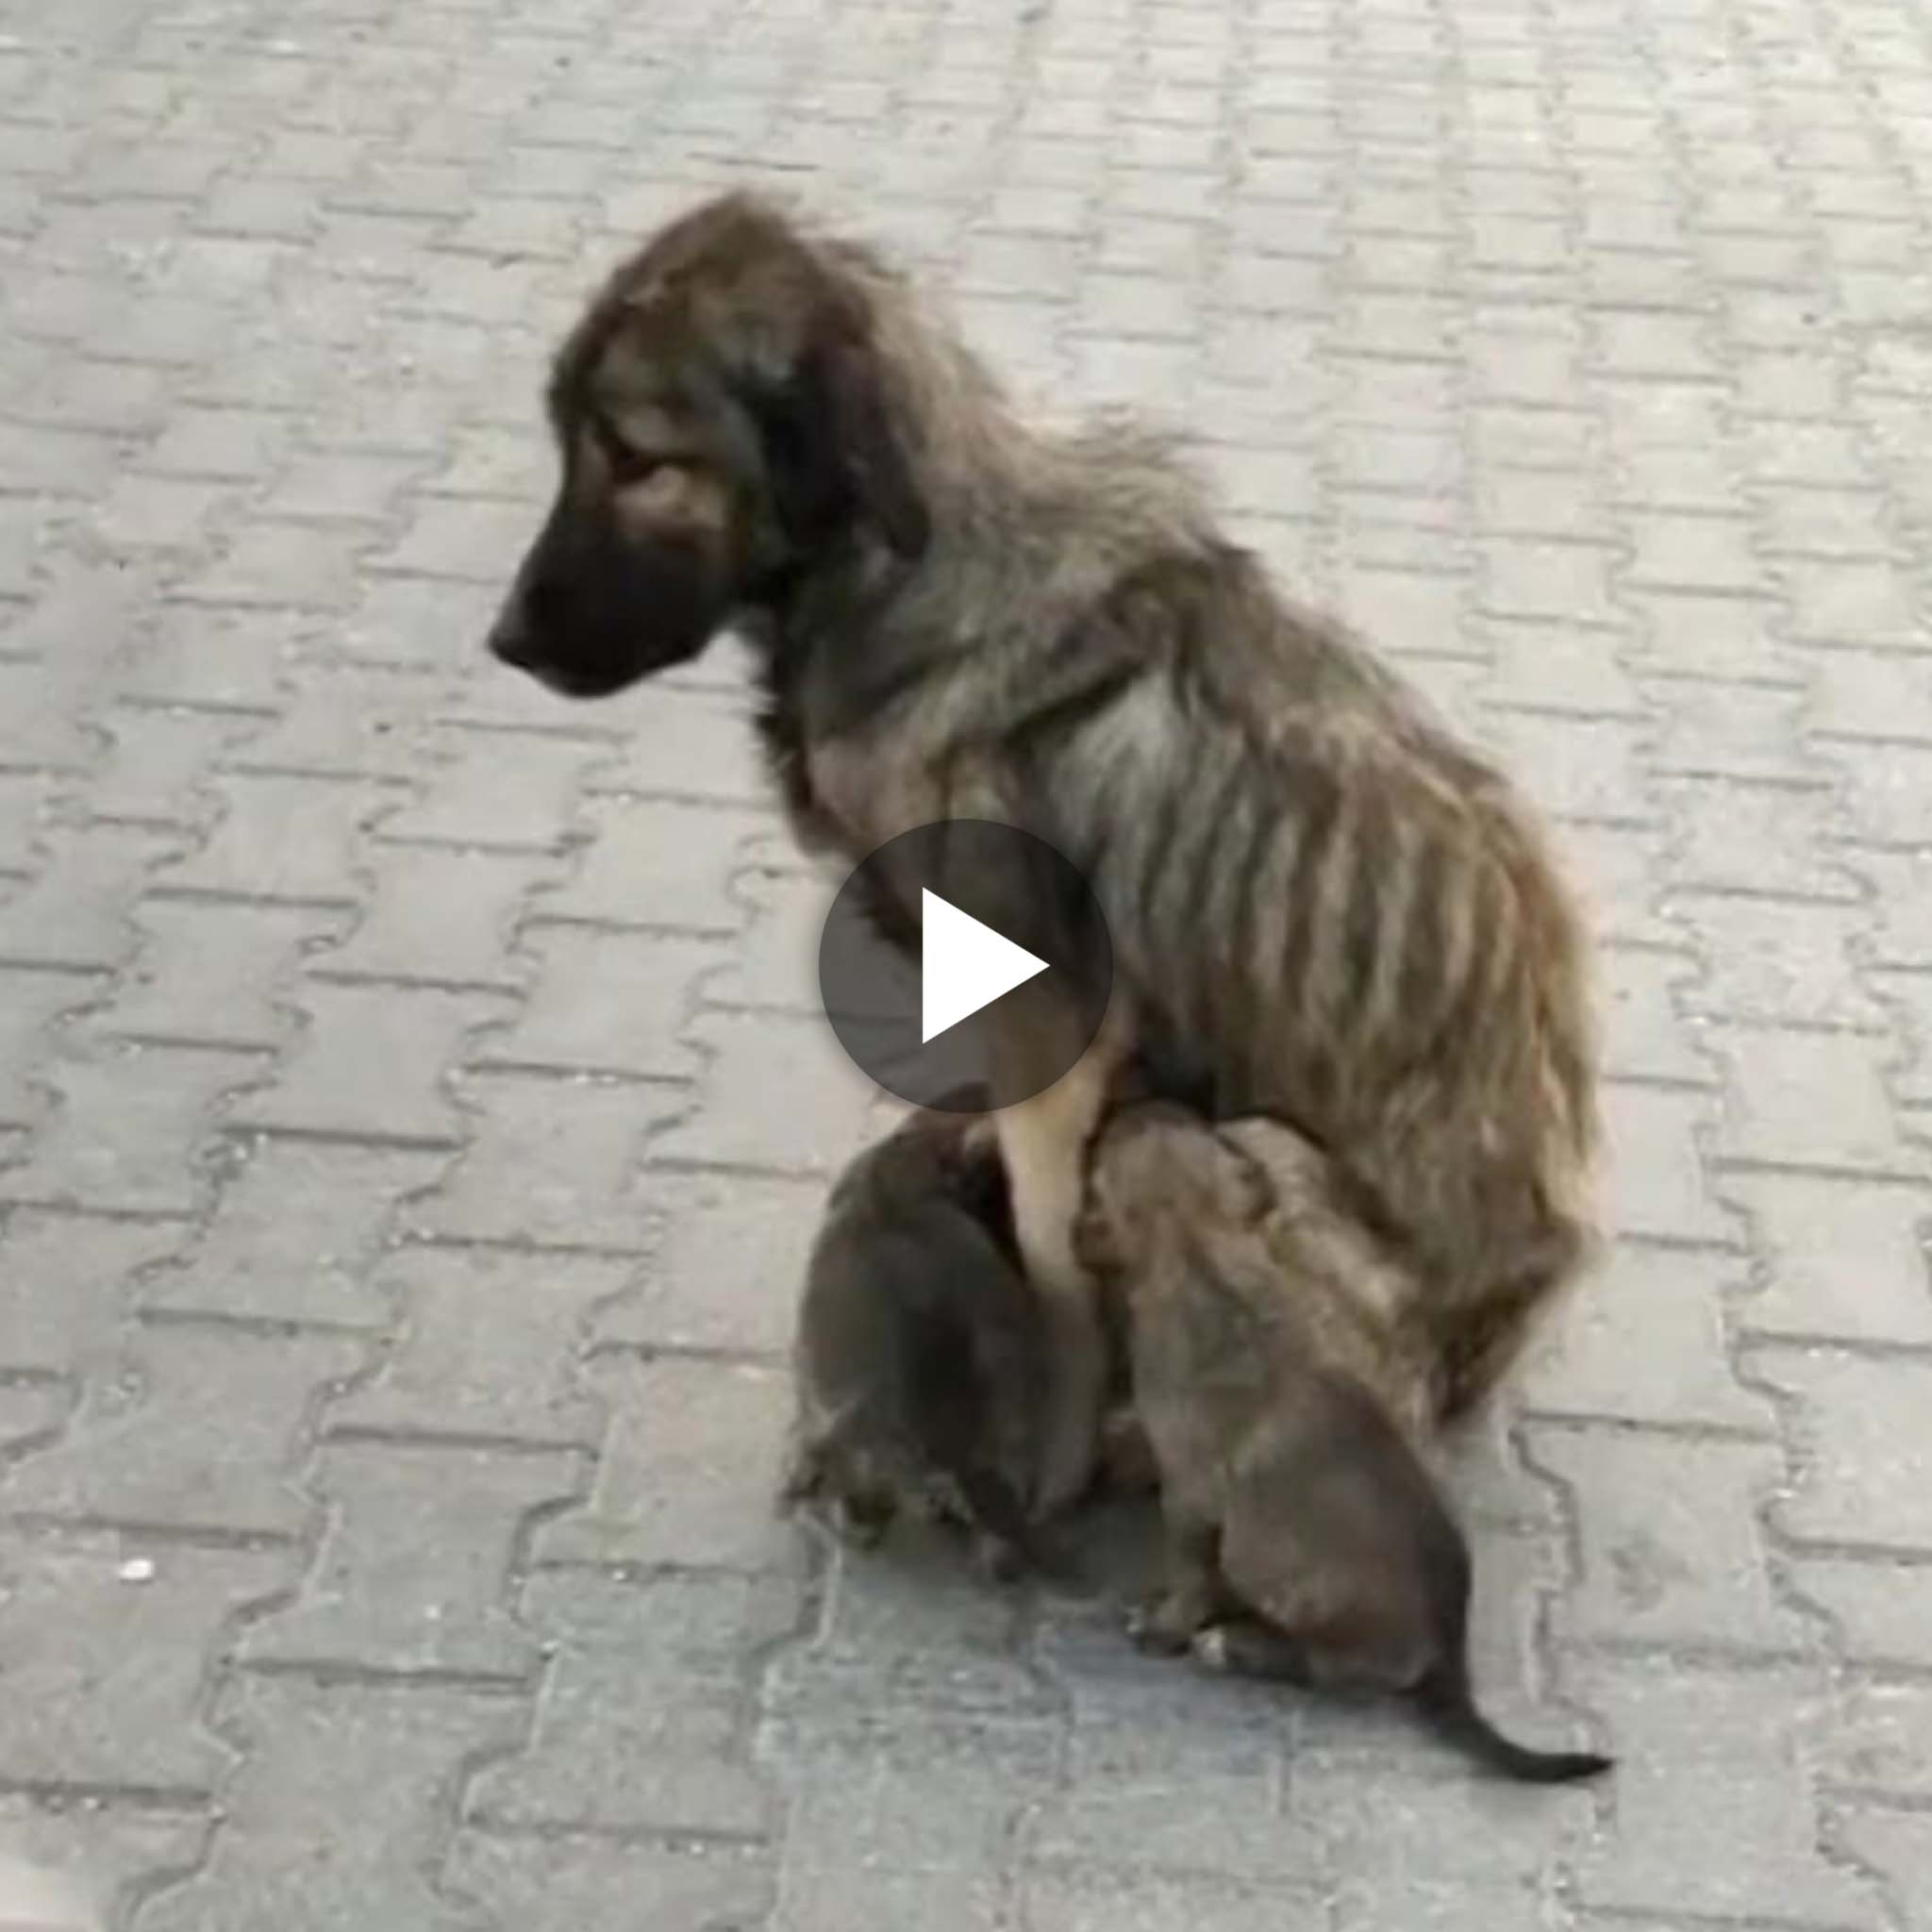 The skinny mother used up all of her remaining breath caring for six tiny puppies.